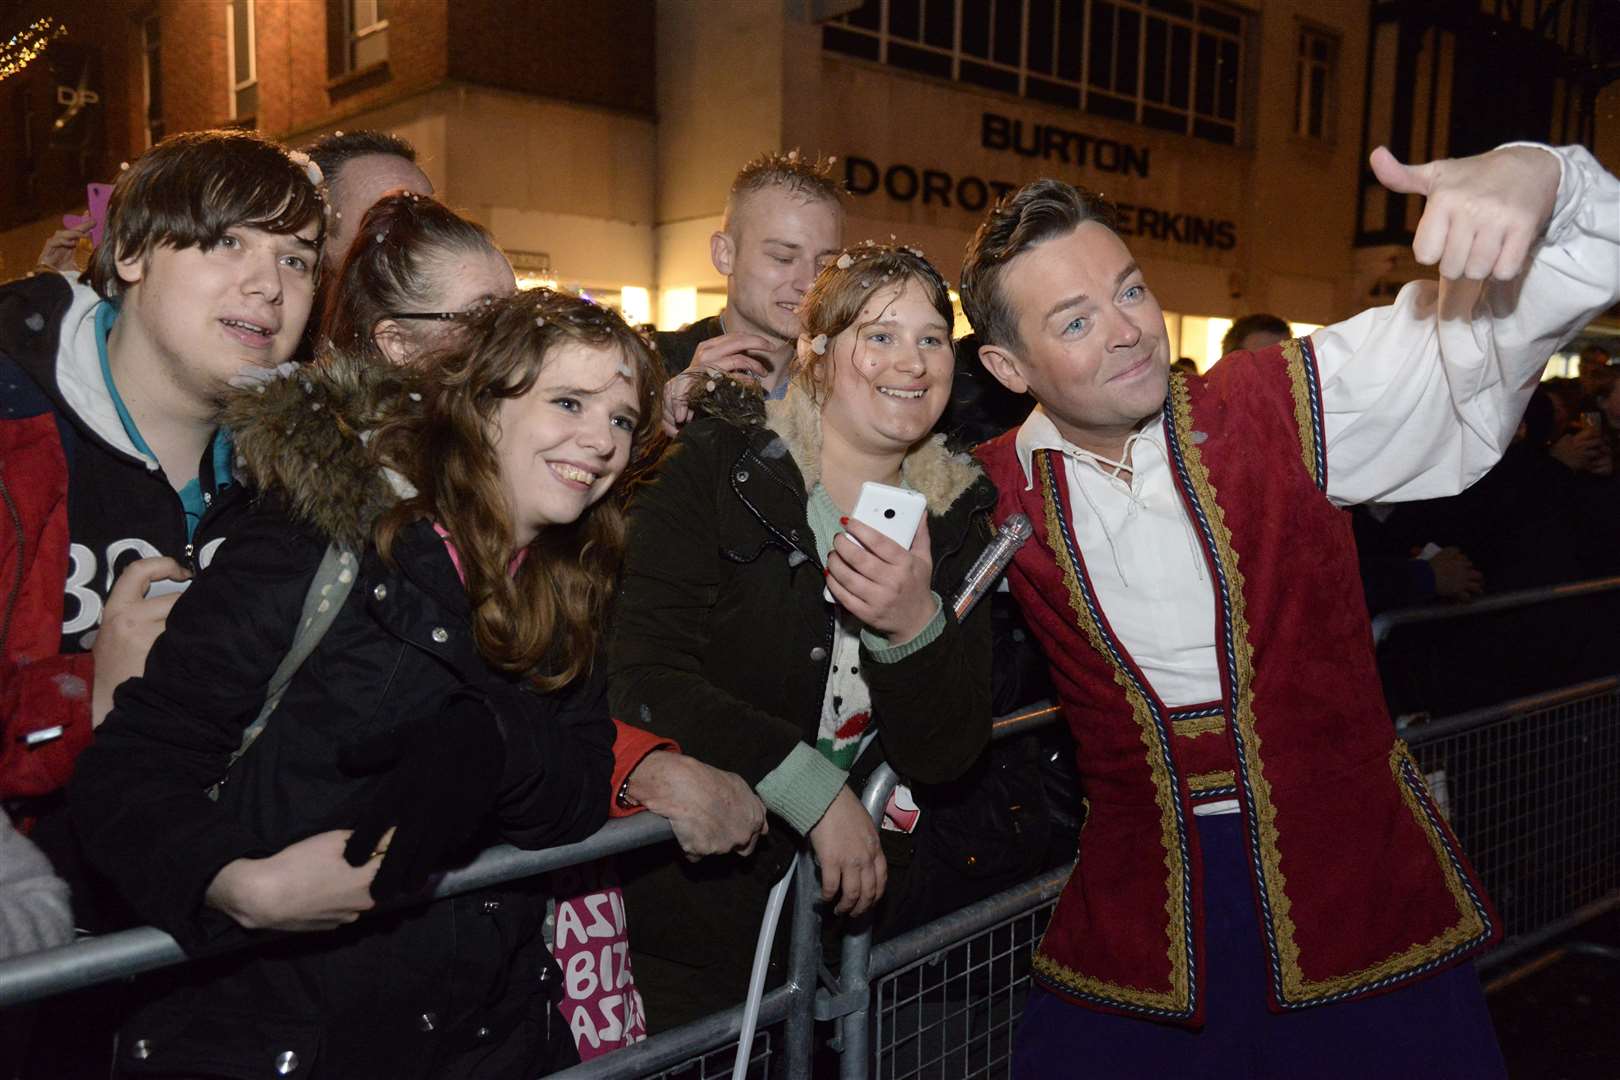 Panto star Stephen Mulhern meets spectators at the Canterbury Christmas lights switch-on in 2016. Picture: Chris Davey